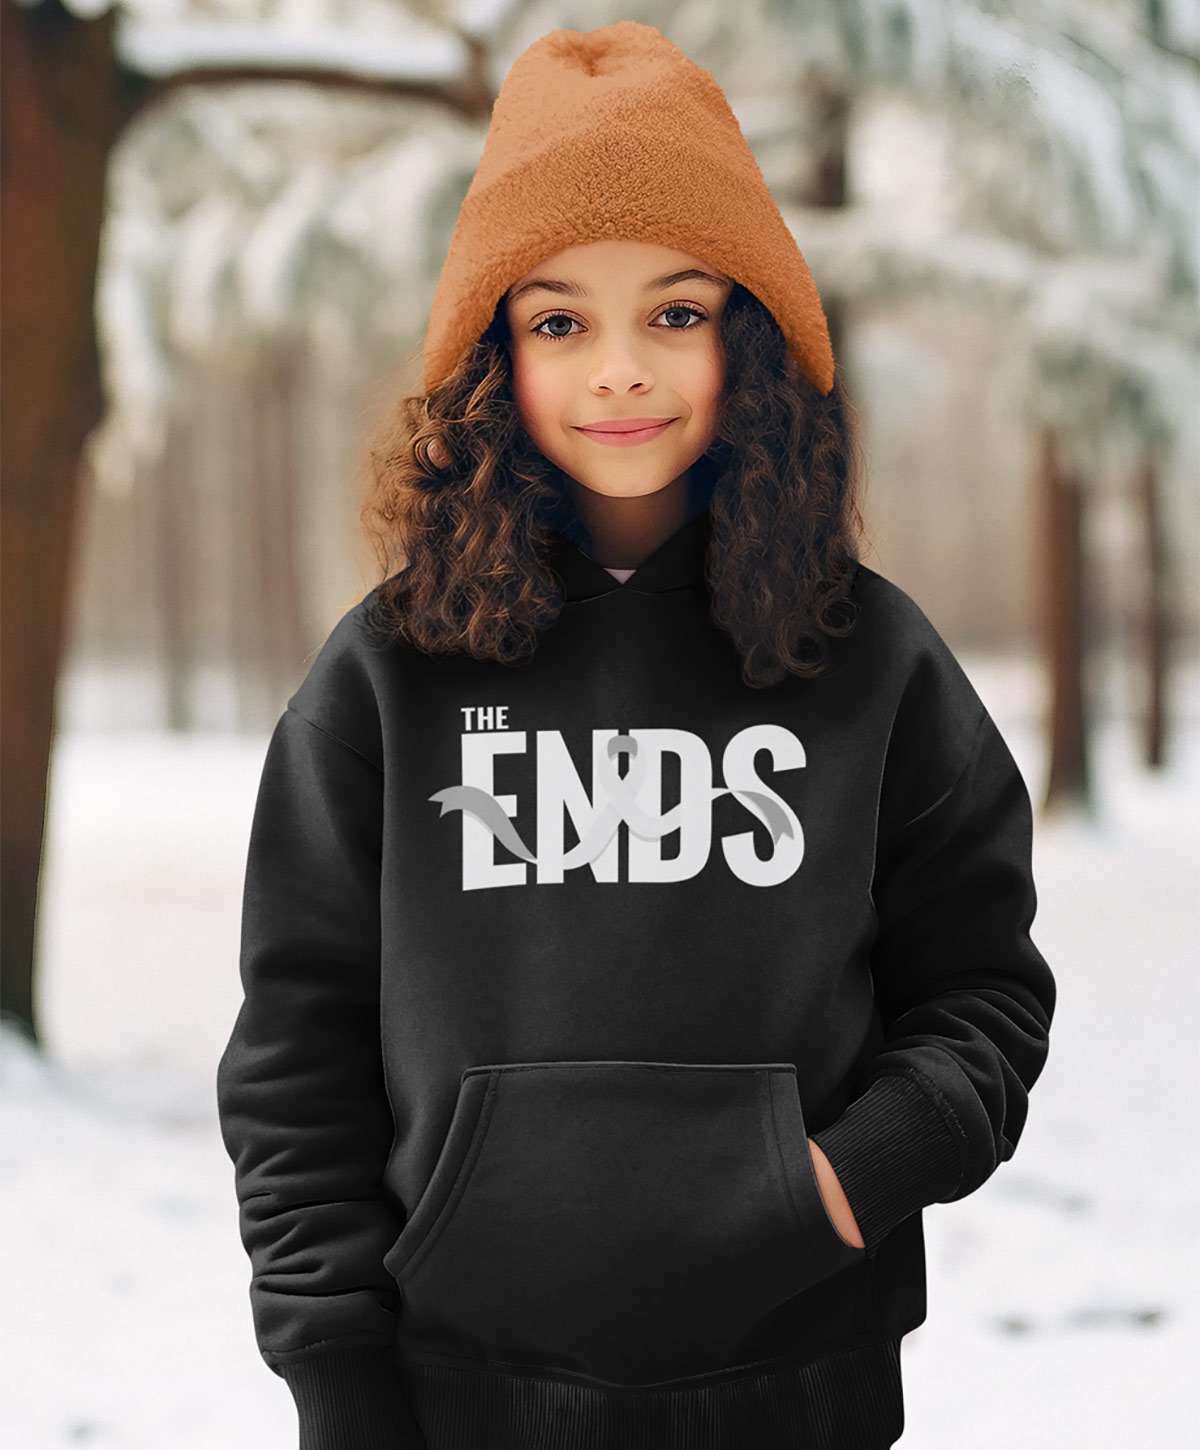 A young girl wearing a brown toque poses for a photo in a black hoodie from The Ends Fight Ribbon collection.